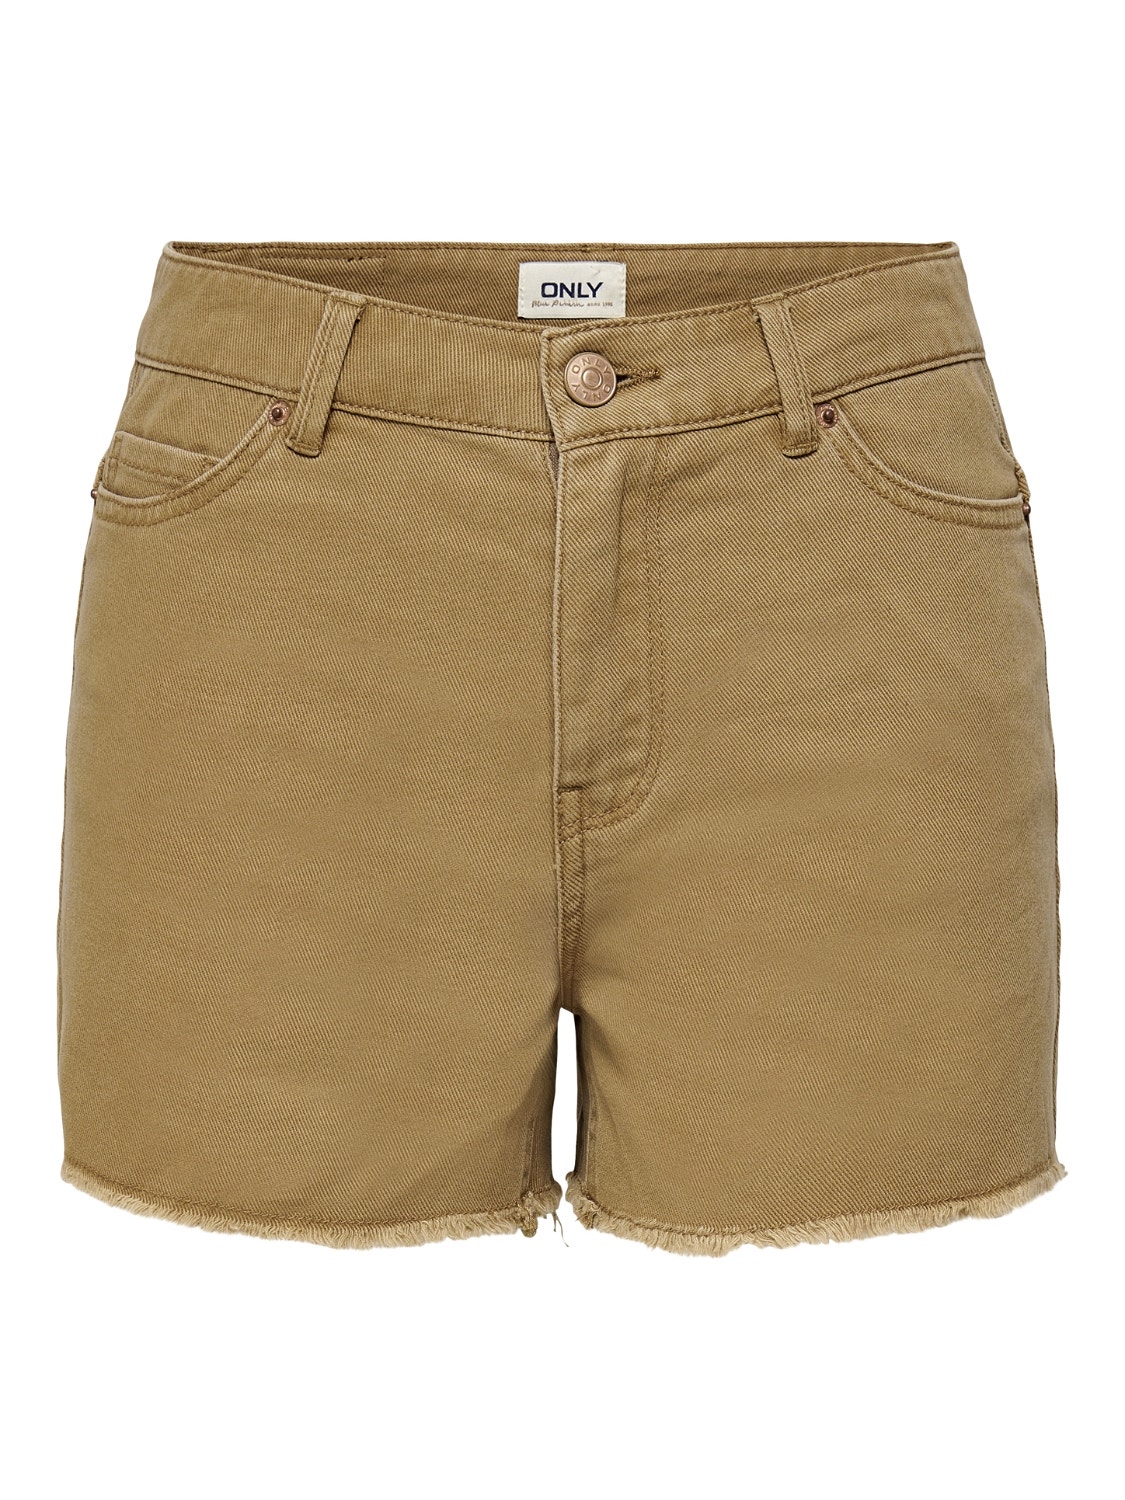 ONLY High waist Shorts -Tobacco Brown - 15260282